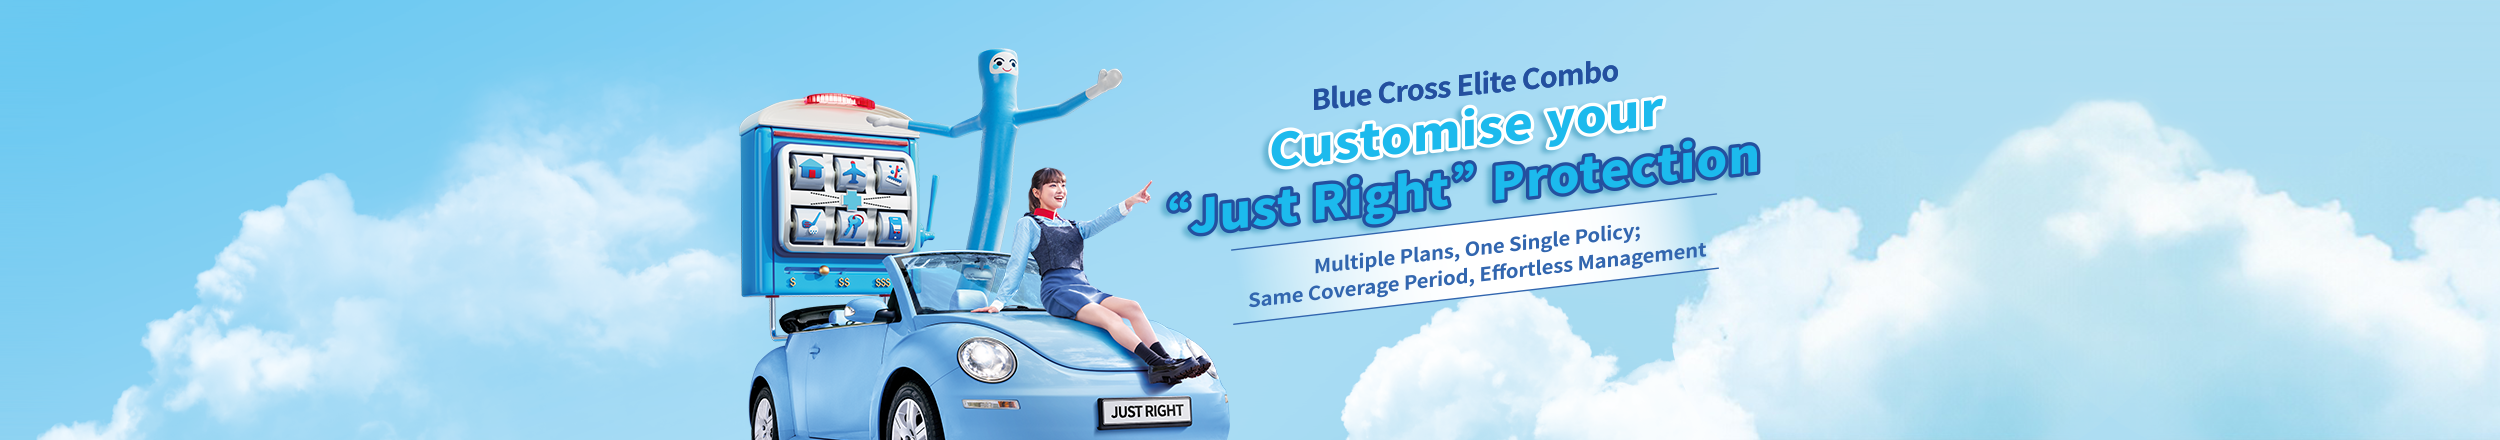 Customise your “Just Right” Protection